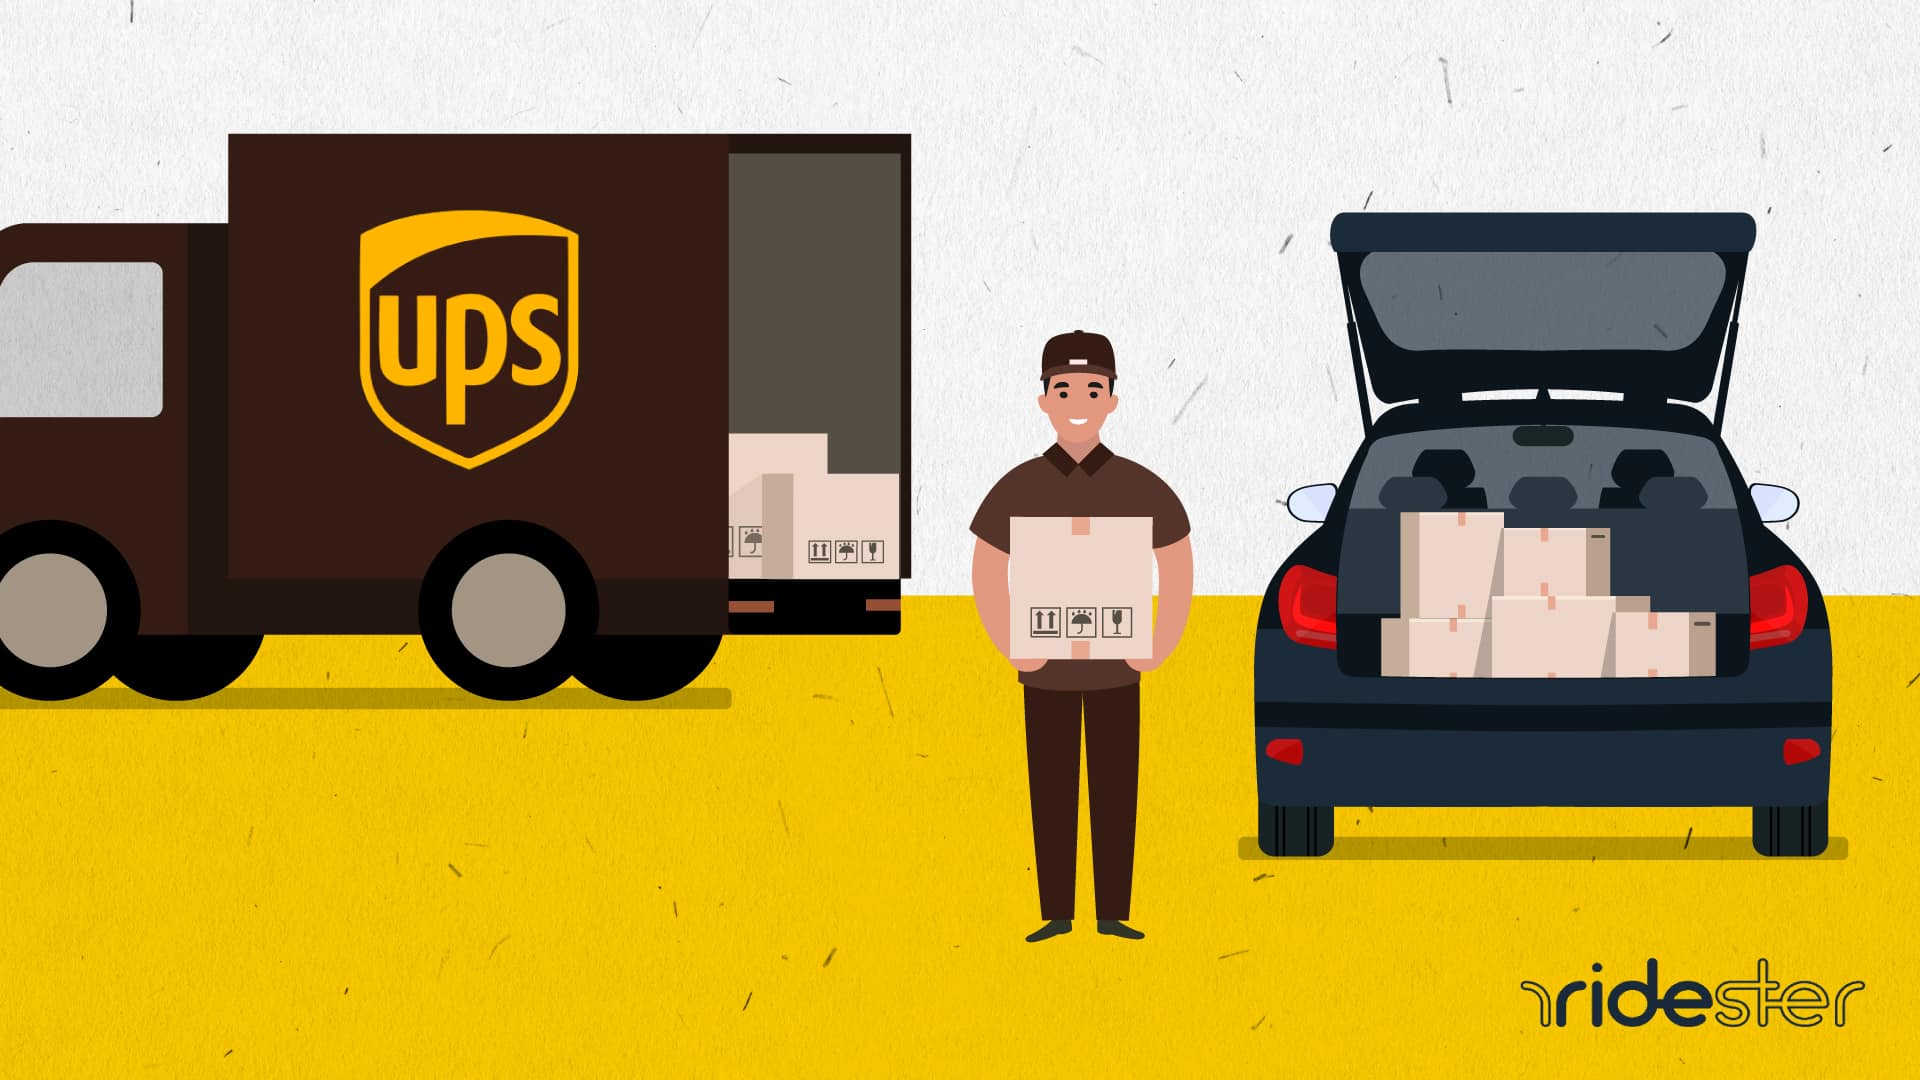 vector illustration of ups personal vehicle driver holding packages in his hands